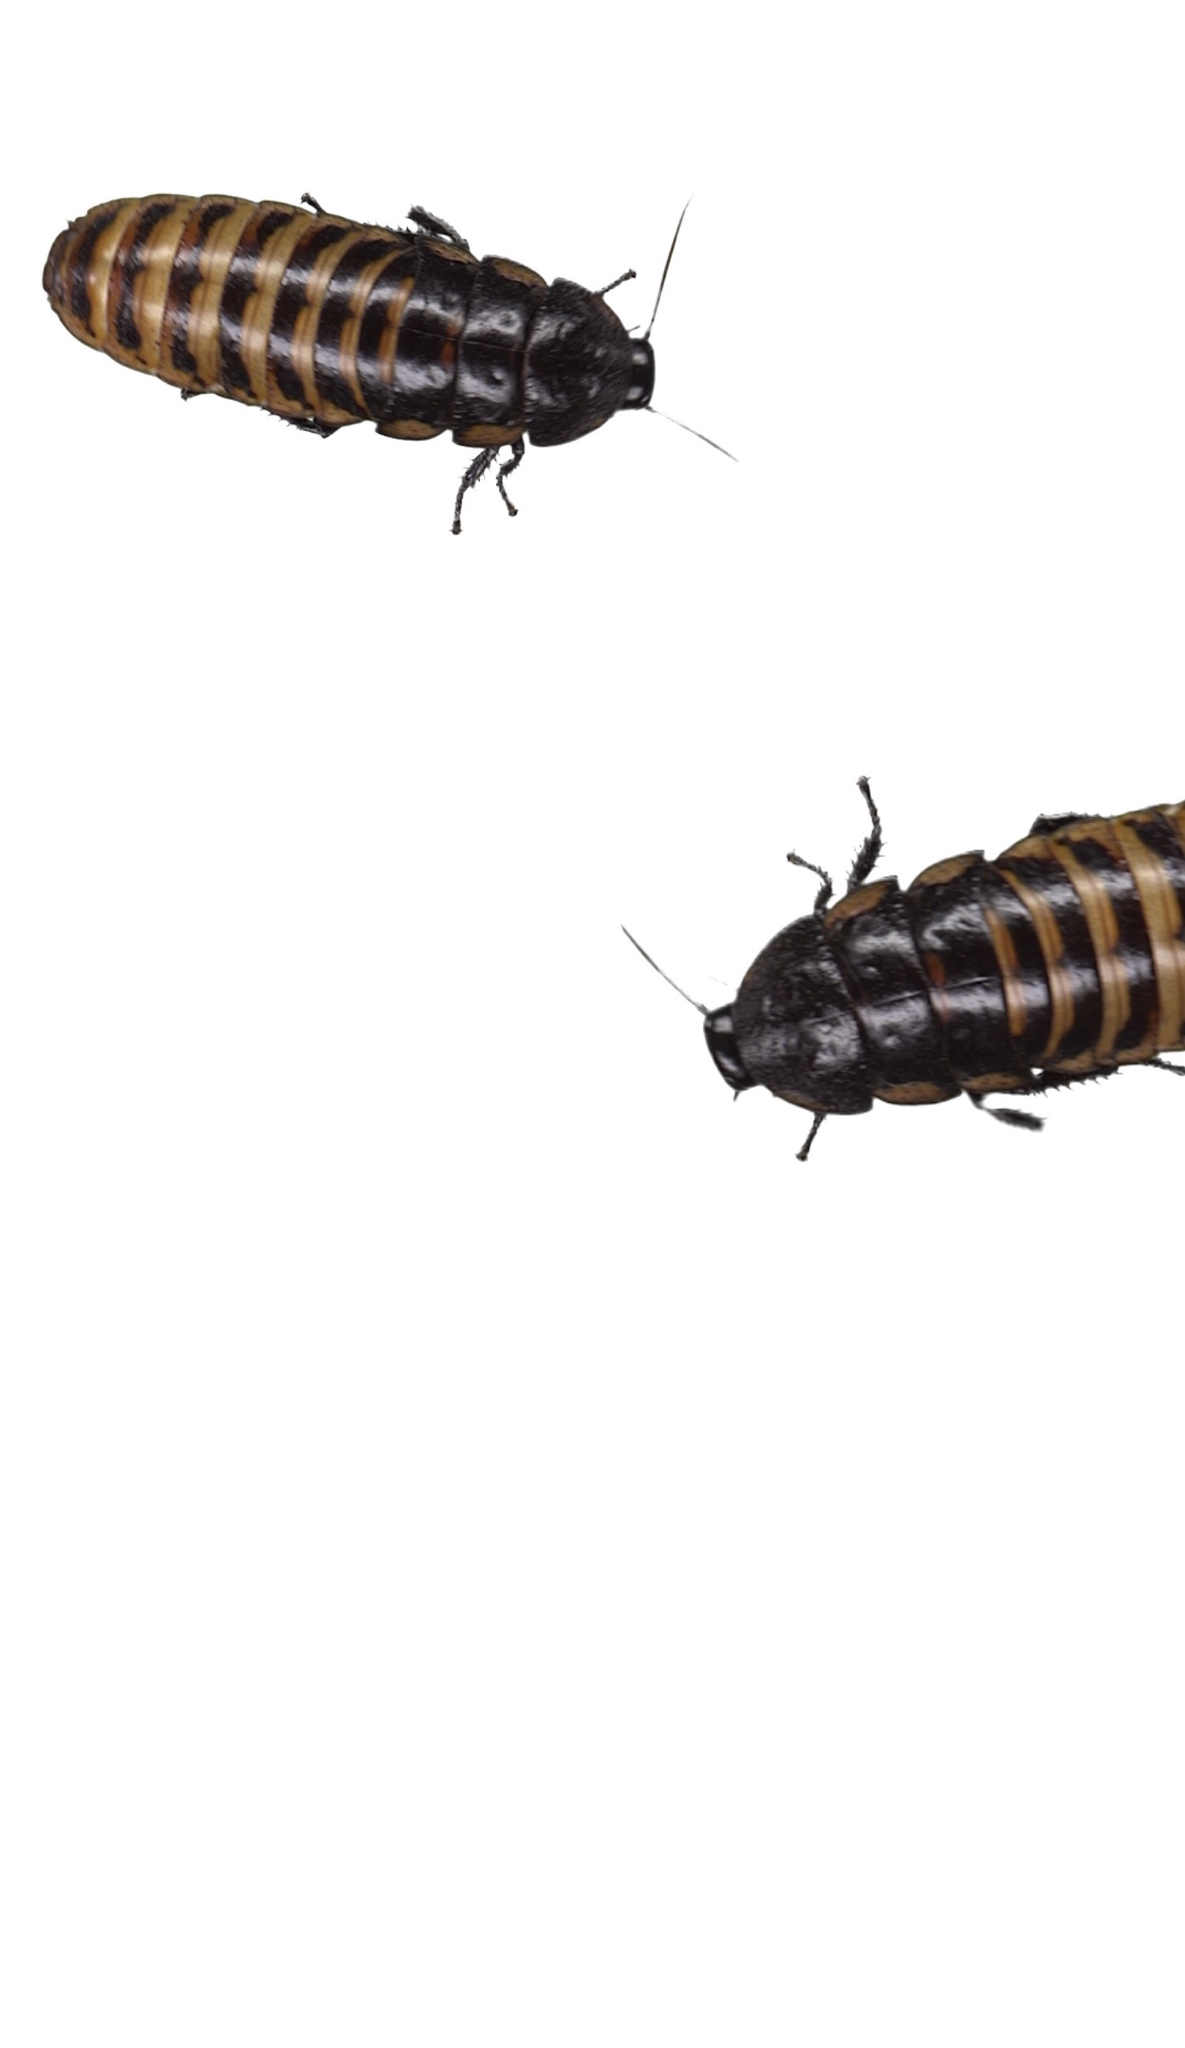 Live Wallpaper For Iphone Xs Max - Madagascar Hissing Cockroach , HD Wallpaper & Backgrounds